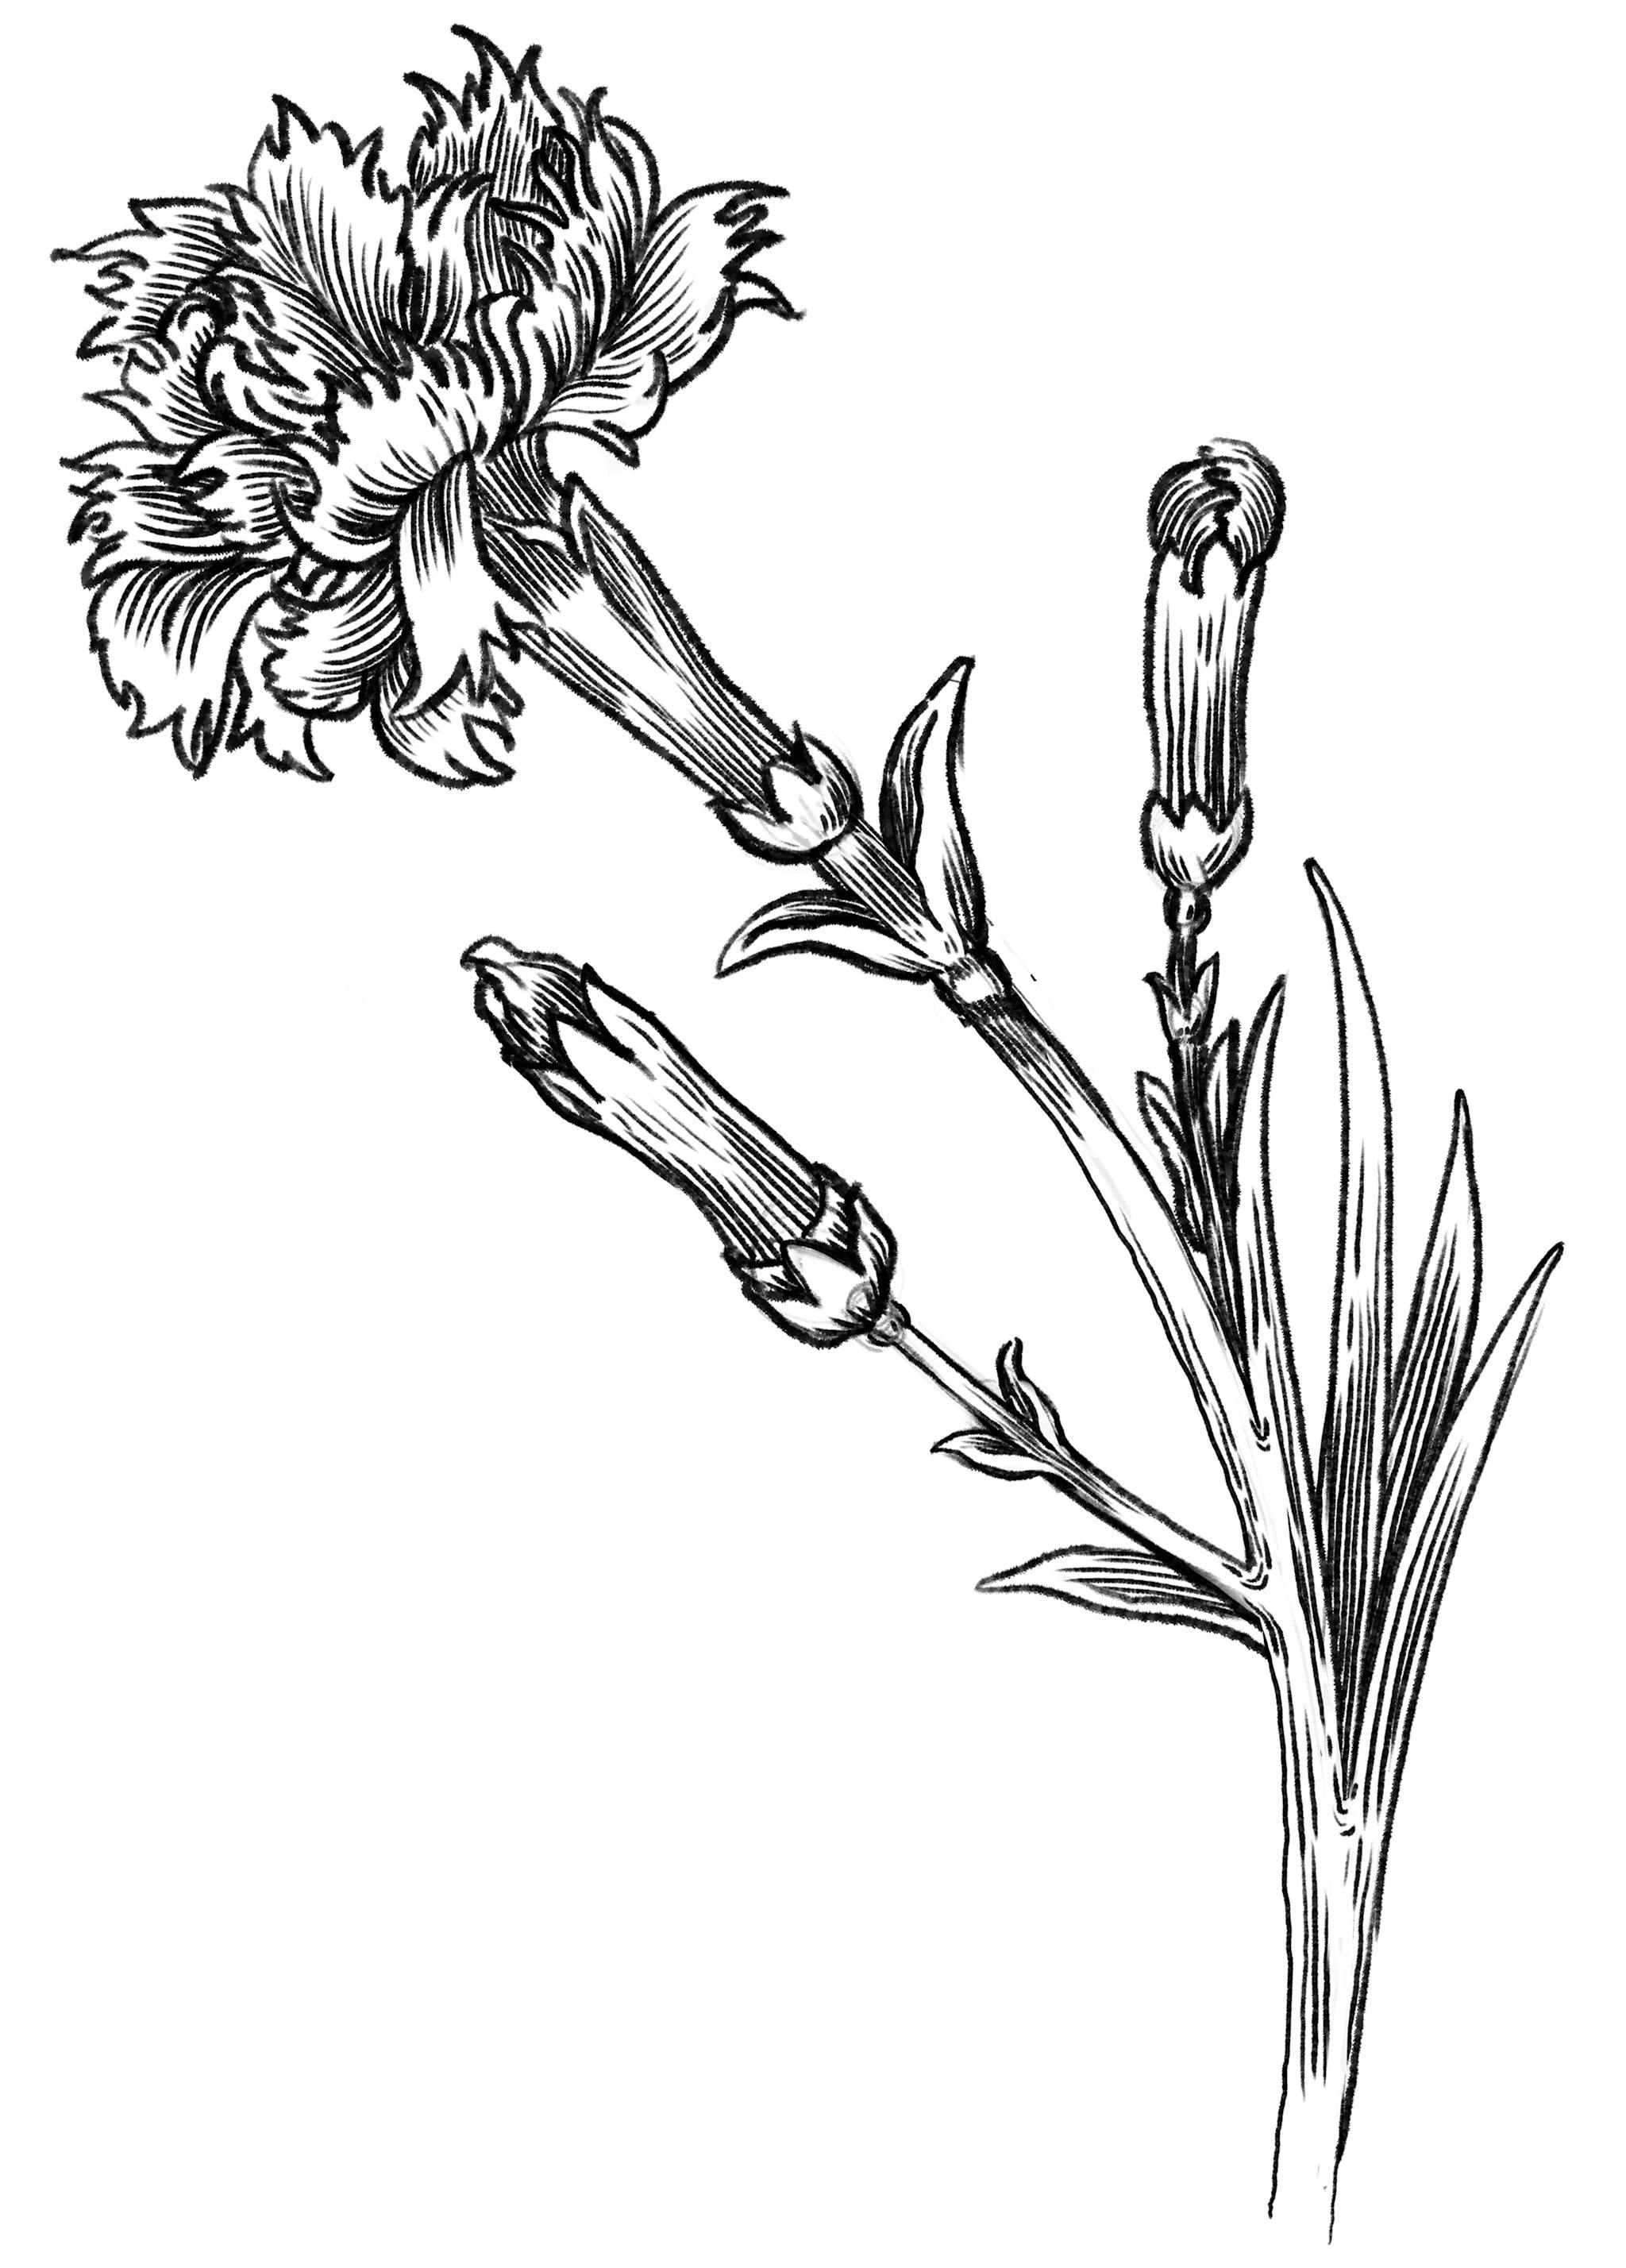 Sketch of a sweet william 